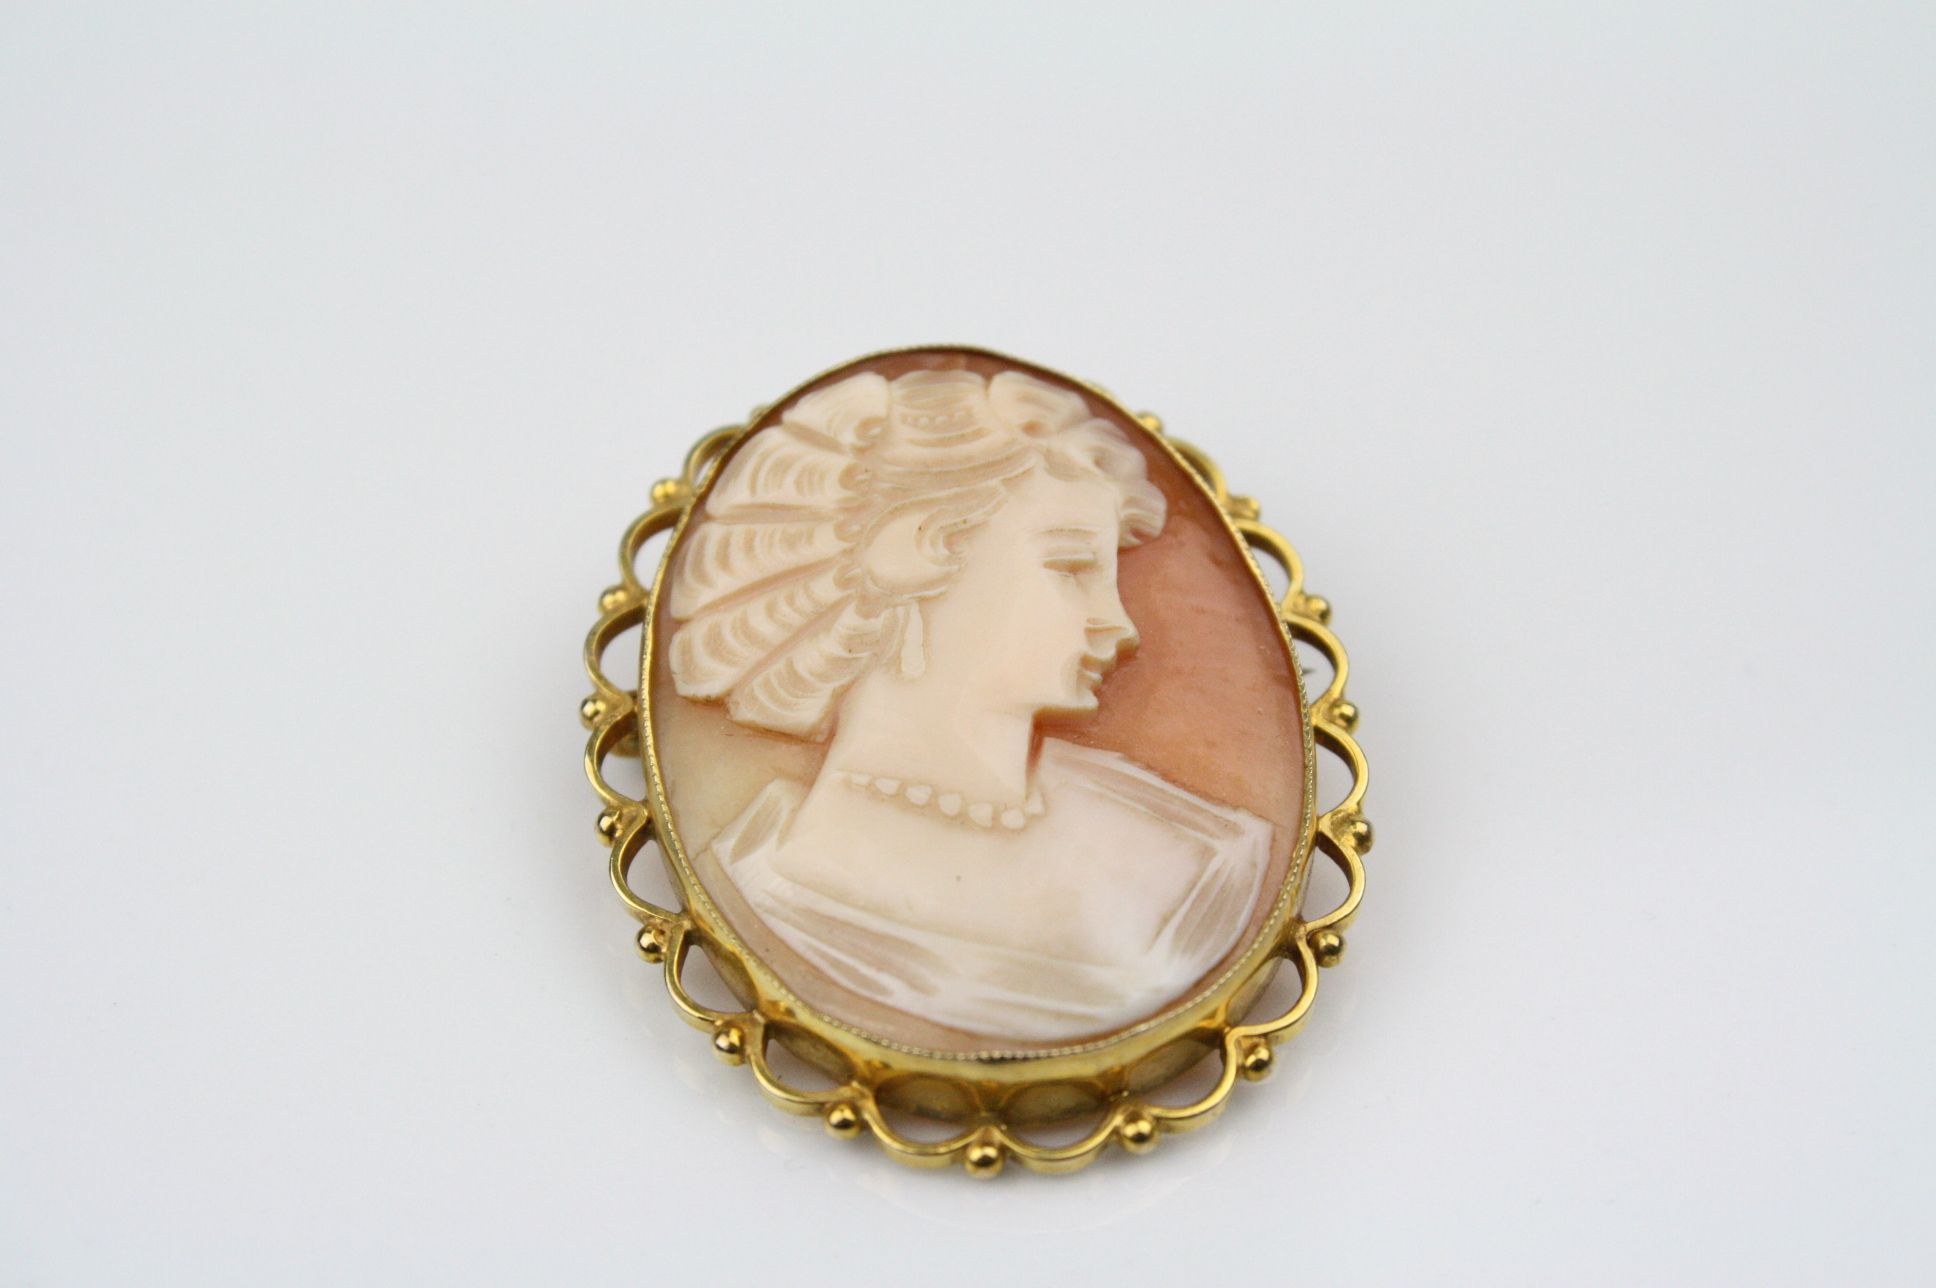 Shell cameo 9ct yellow gold brooch, the cameo depicting female profile, collet setting, scroll and